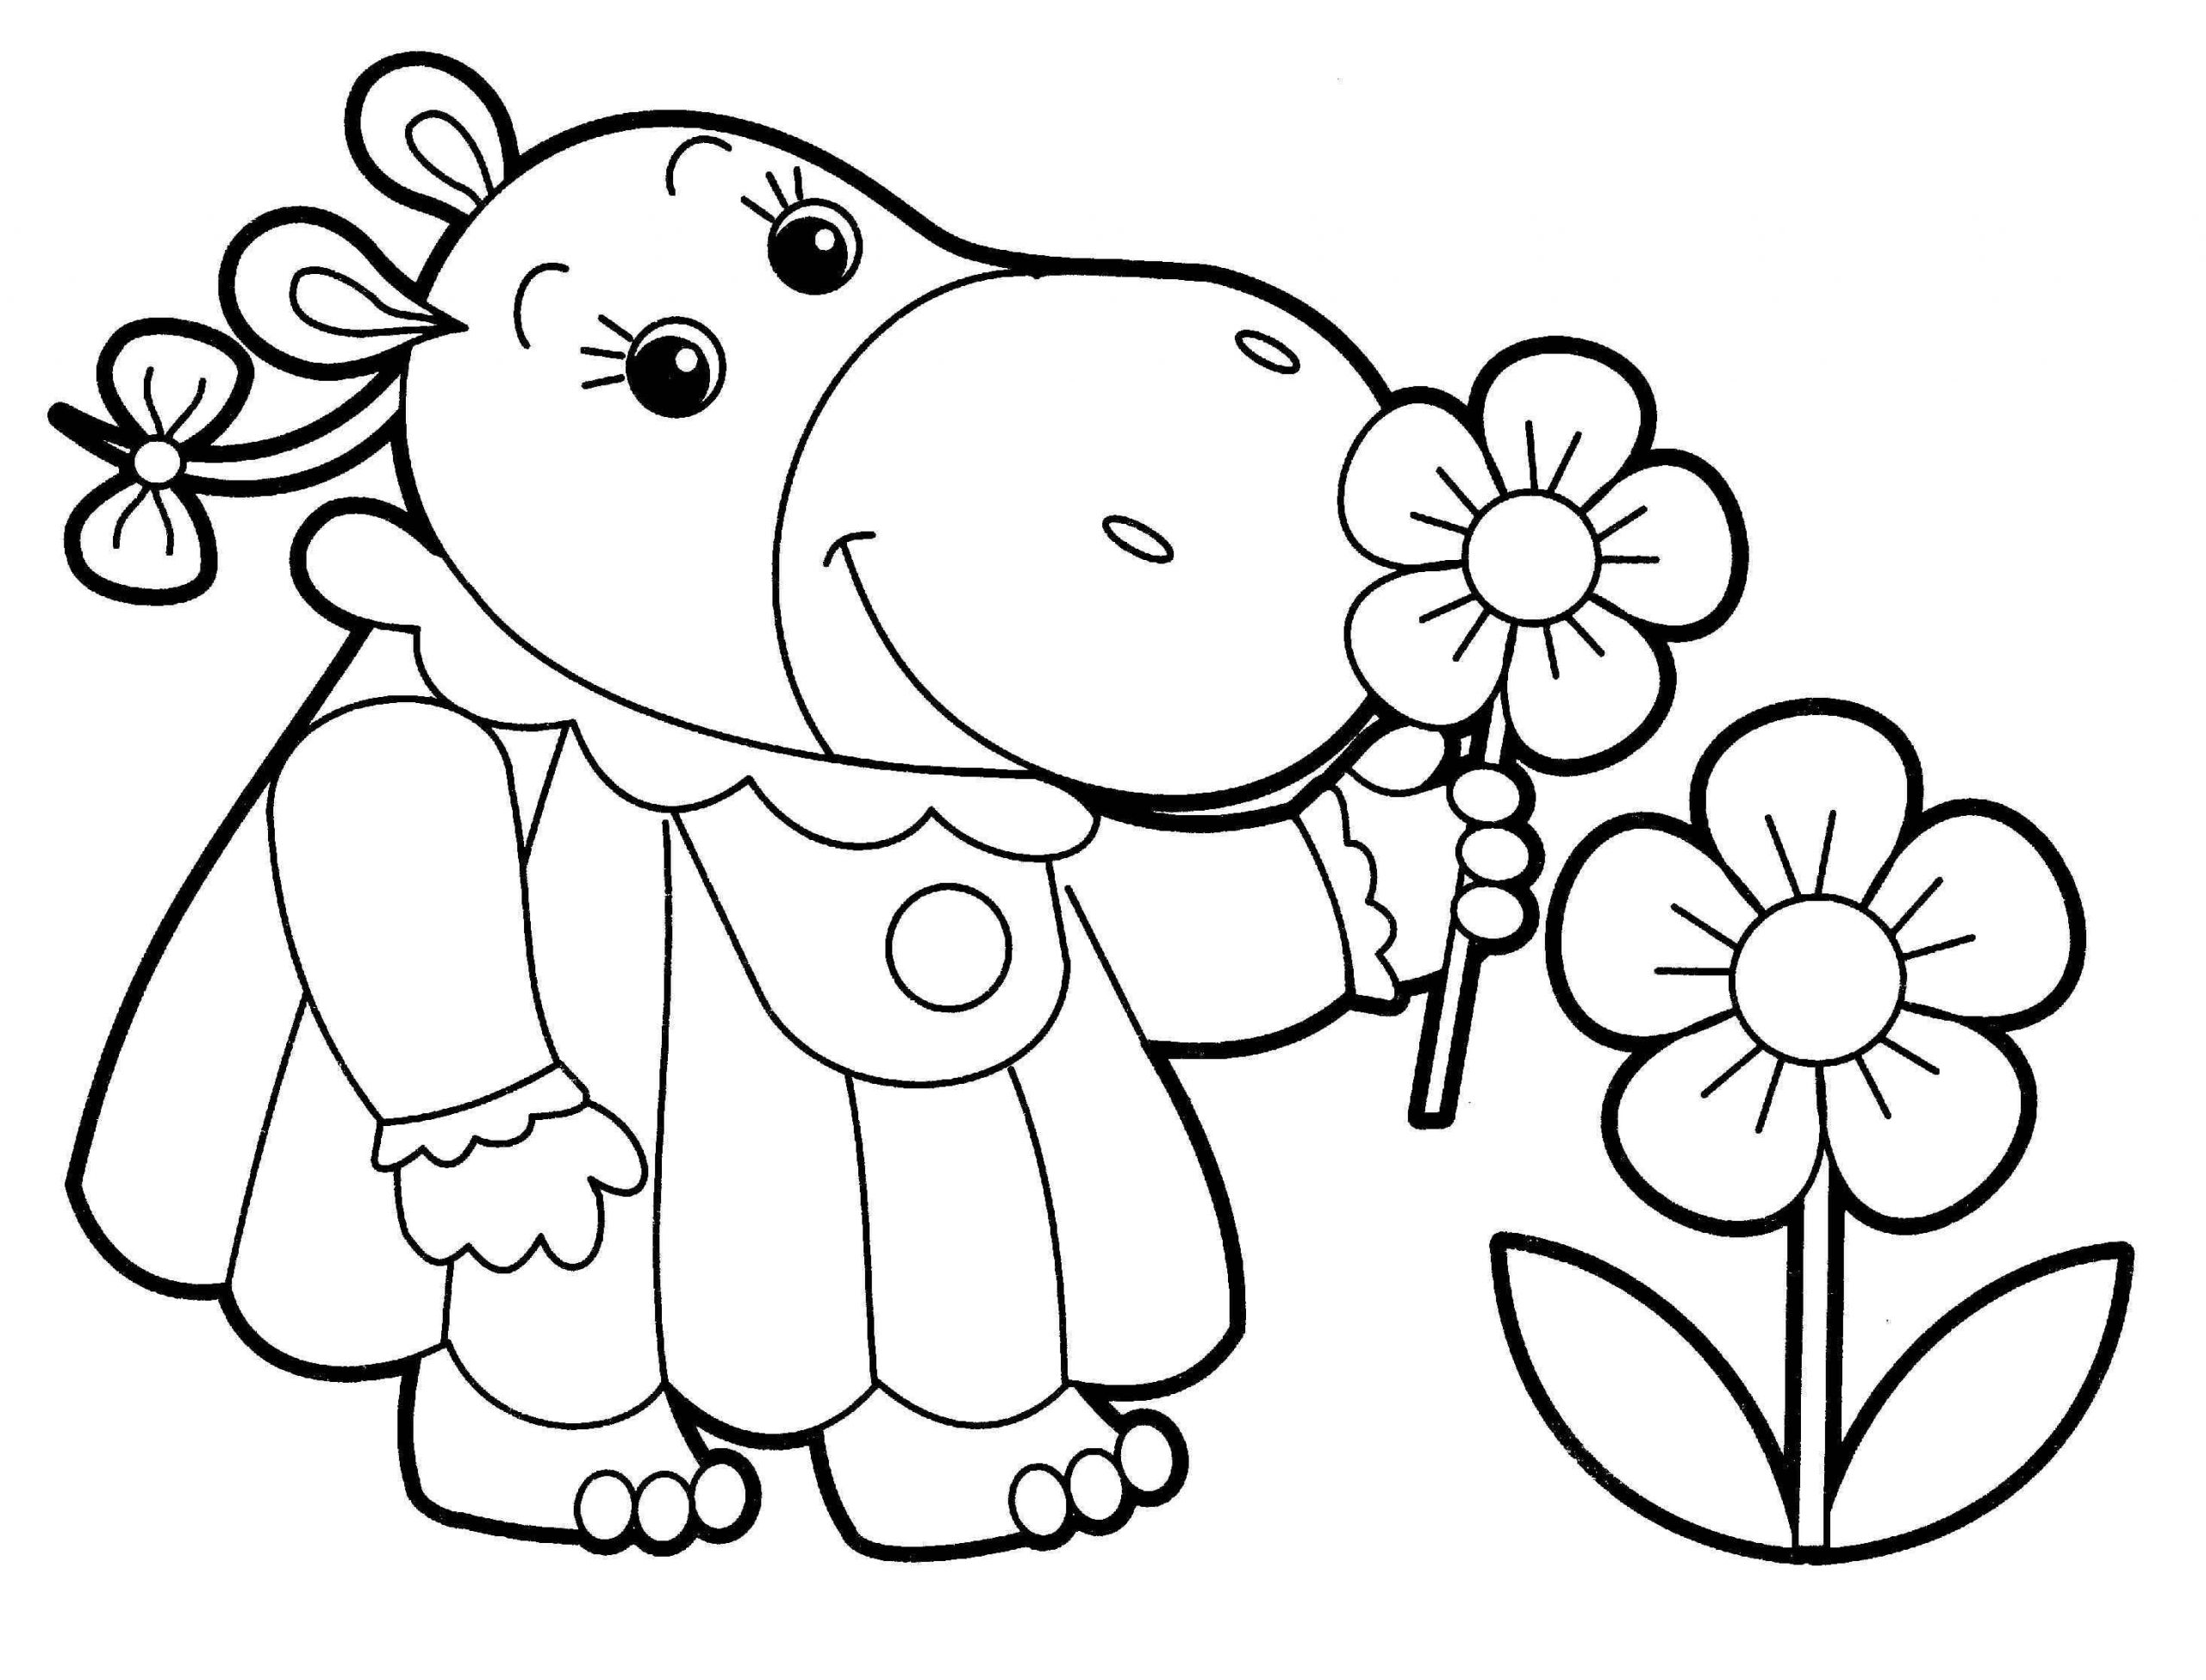 Coloring Sheets For Little Kids
 Animal Coloring Pages for Adults Bestofcoloring